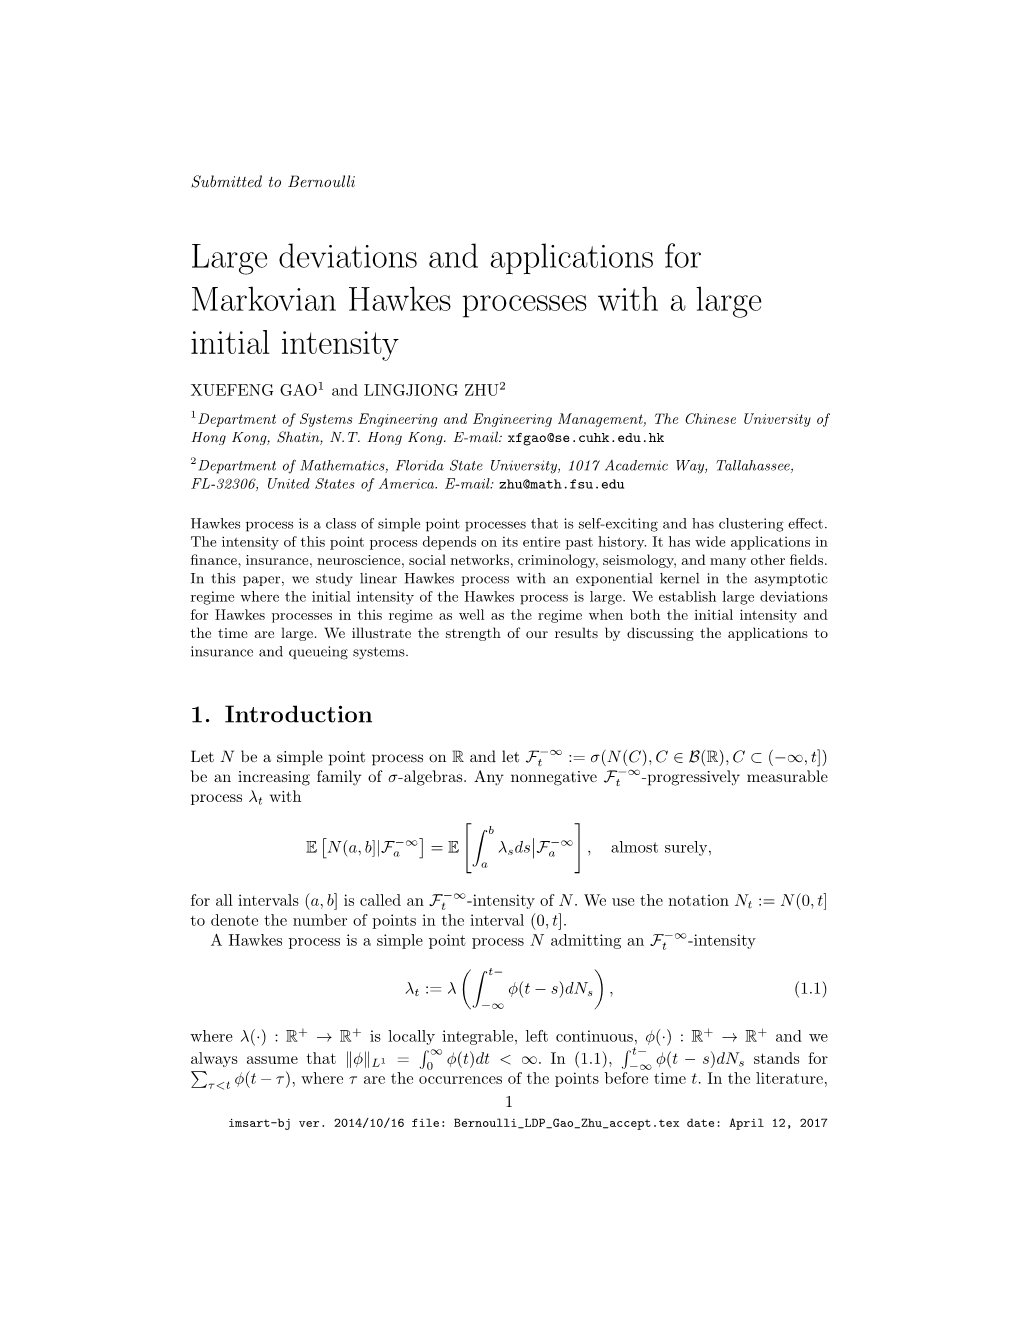 Large Deviations and Applications for Markovian Hawkes Processes with a Large Initial Intensity